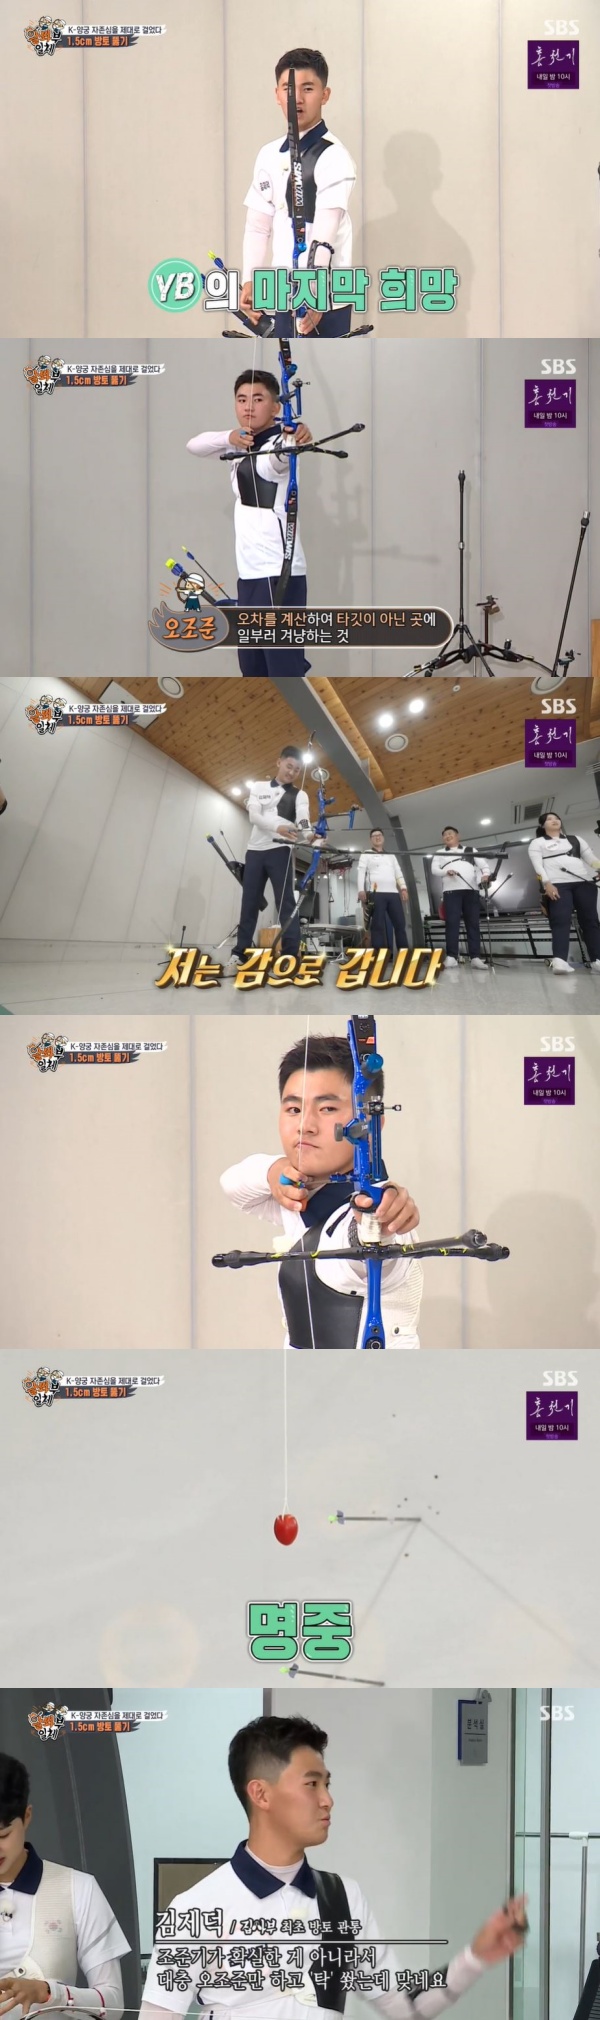 On the 29th SBS entertainment program All The Butlers, the archery national team Oh Jin-Hyek, Kim Woo-jin and Kim je-deok, Kang Chae-young, Jang Min-hee and Ansan, who turned into masters, were portrayed.Kim je-deok was the last runner on the defensive YB team, but Kim je-deok shot a bow far from his target. Kang Chae-young, who saw it, said, Are you making an O-key?, and Kim je-deok, who caught the feeling by O-jazzing, hit a 1.5cm drop tomatoes, so Oh Jin-Hyek said, You hit it with O-jazzo?He was surprised by the feeling of Kim je-deok.Lee Seung-gi asked Kim je-deok, What did you feel?Kim je-deok replied modestly, I did not have a clear sight, so I shot it roughly and shot it.Meanwhile, All The Butlers is a life extracurricular entertainment program with youths full of question marks and myway geek masters. It airs every Sunday at 6:25 p.m.Photo SBS broadcast screen capture